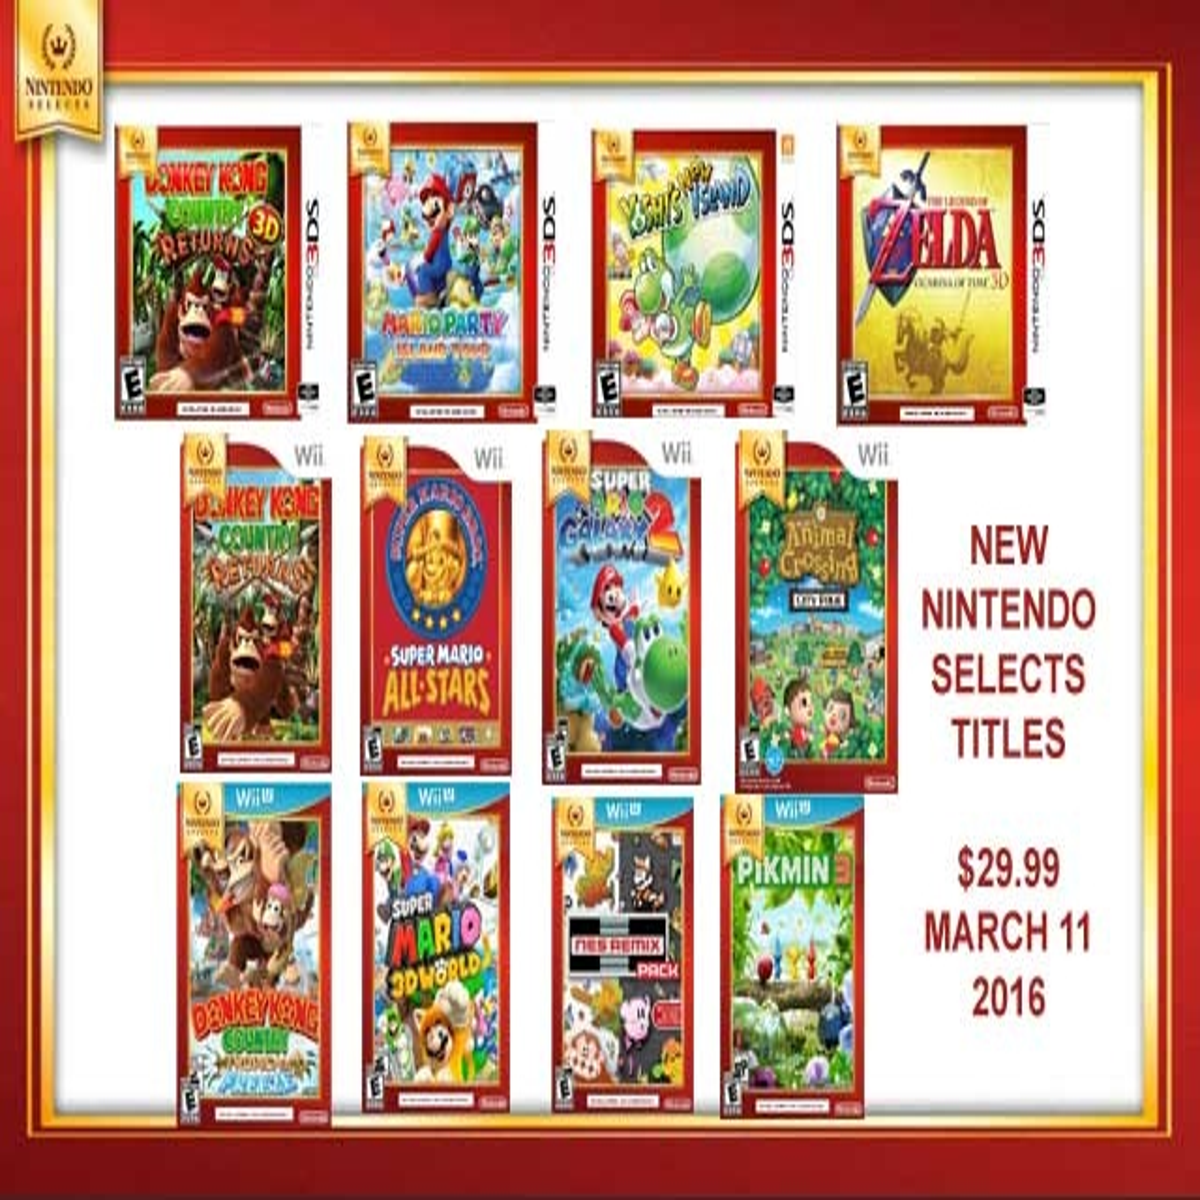 New Nintendo Selects Wii titles officially announced – Destructoid